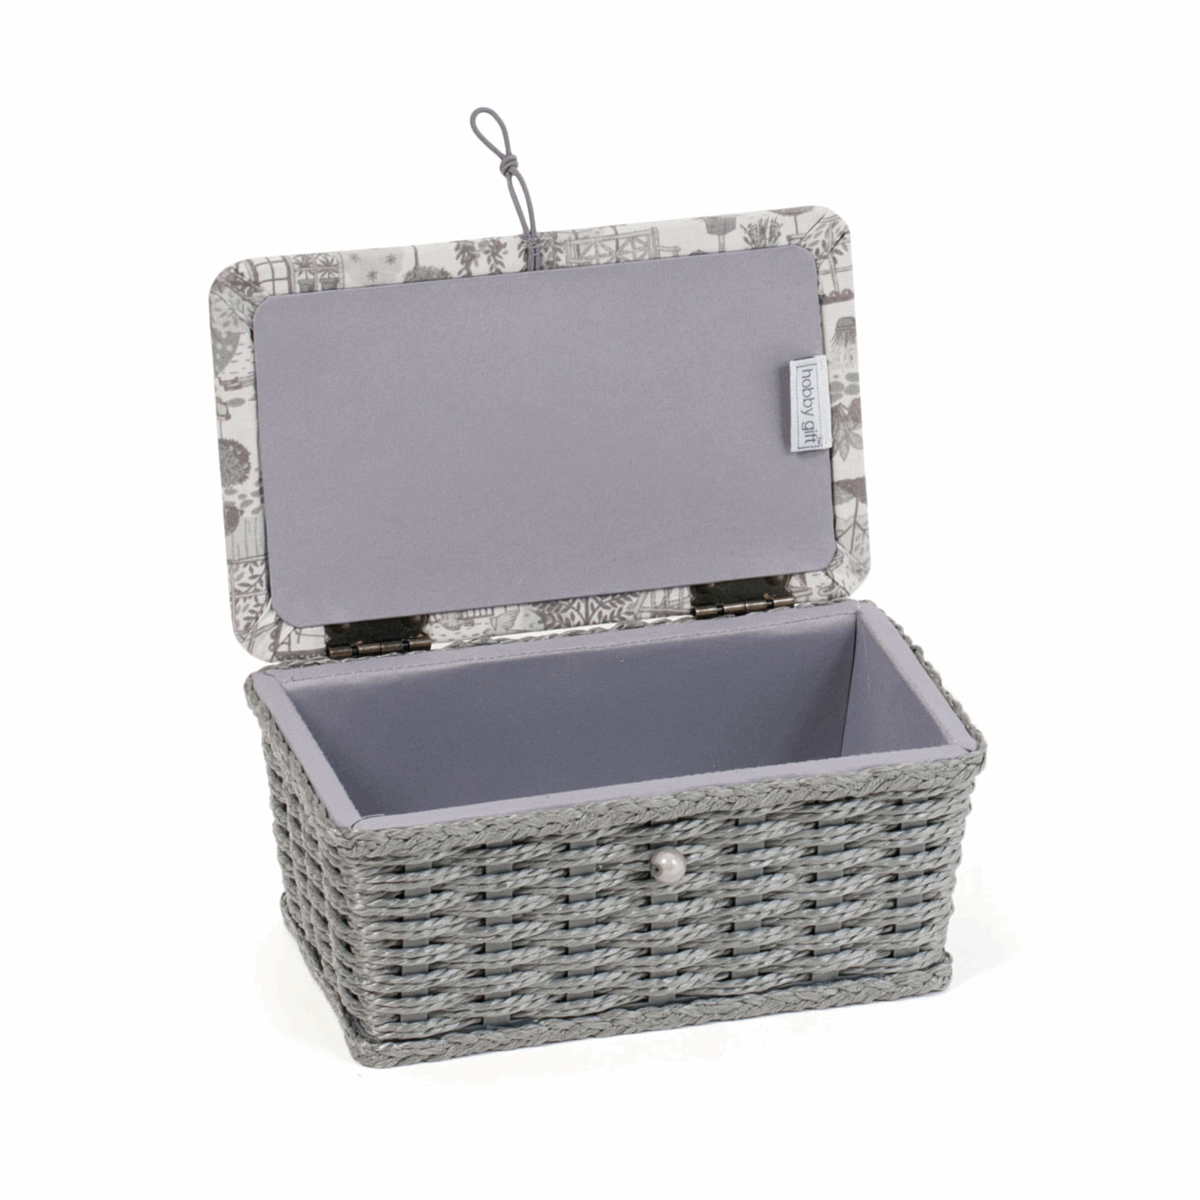 In The Garden Woven Sewing Box - Small